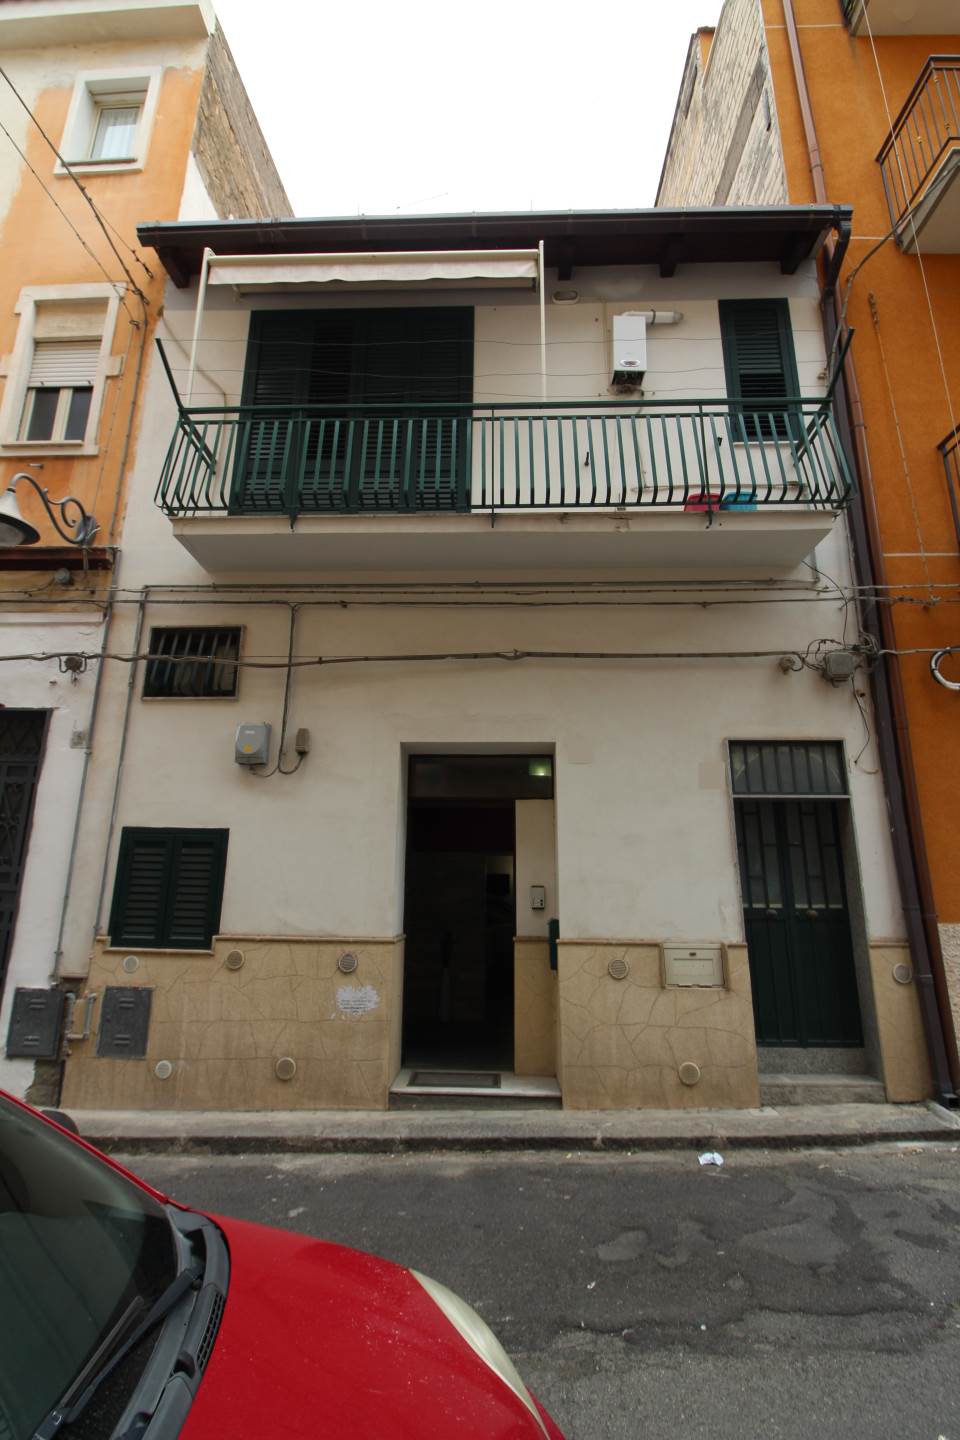 QUATTARARI, LENTINI, Single house for sale of 119 Sq. mt., Restored, placed at Ground on 2, composed by: 4 Rooms, Separate kitchen, , 2 Bedrooms, 1 